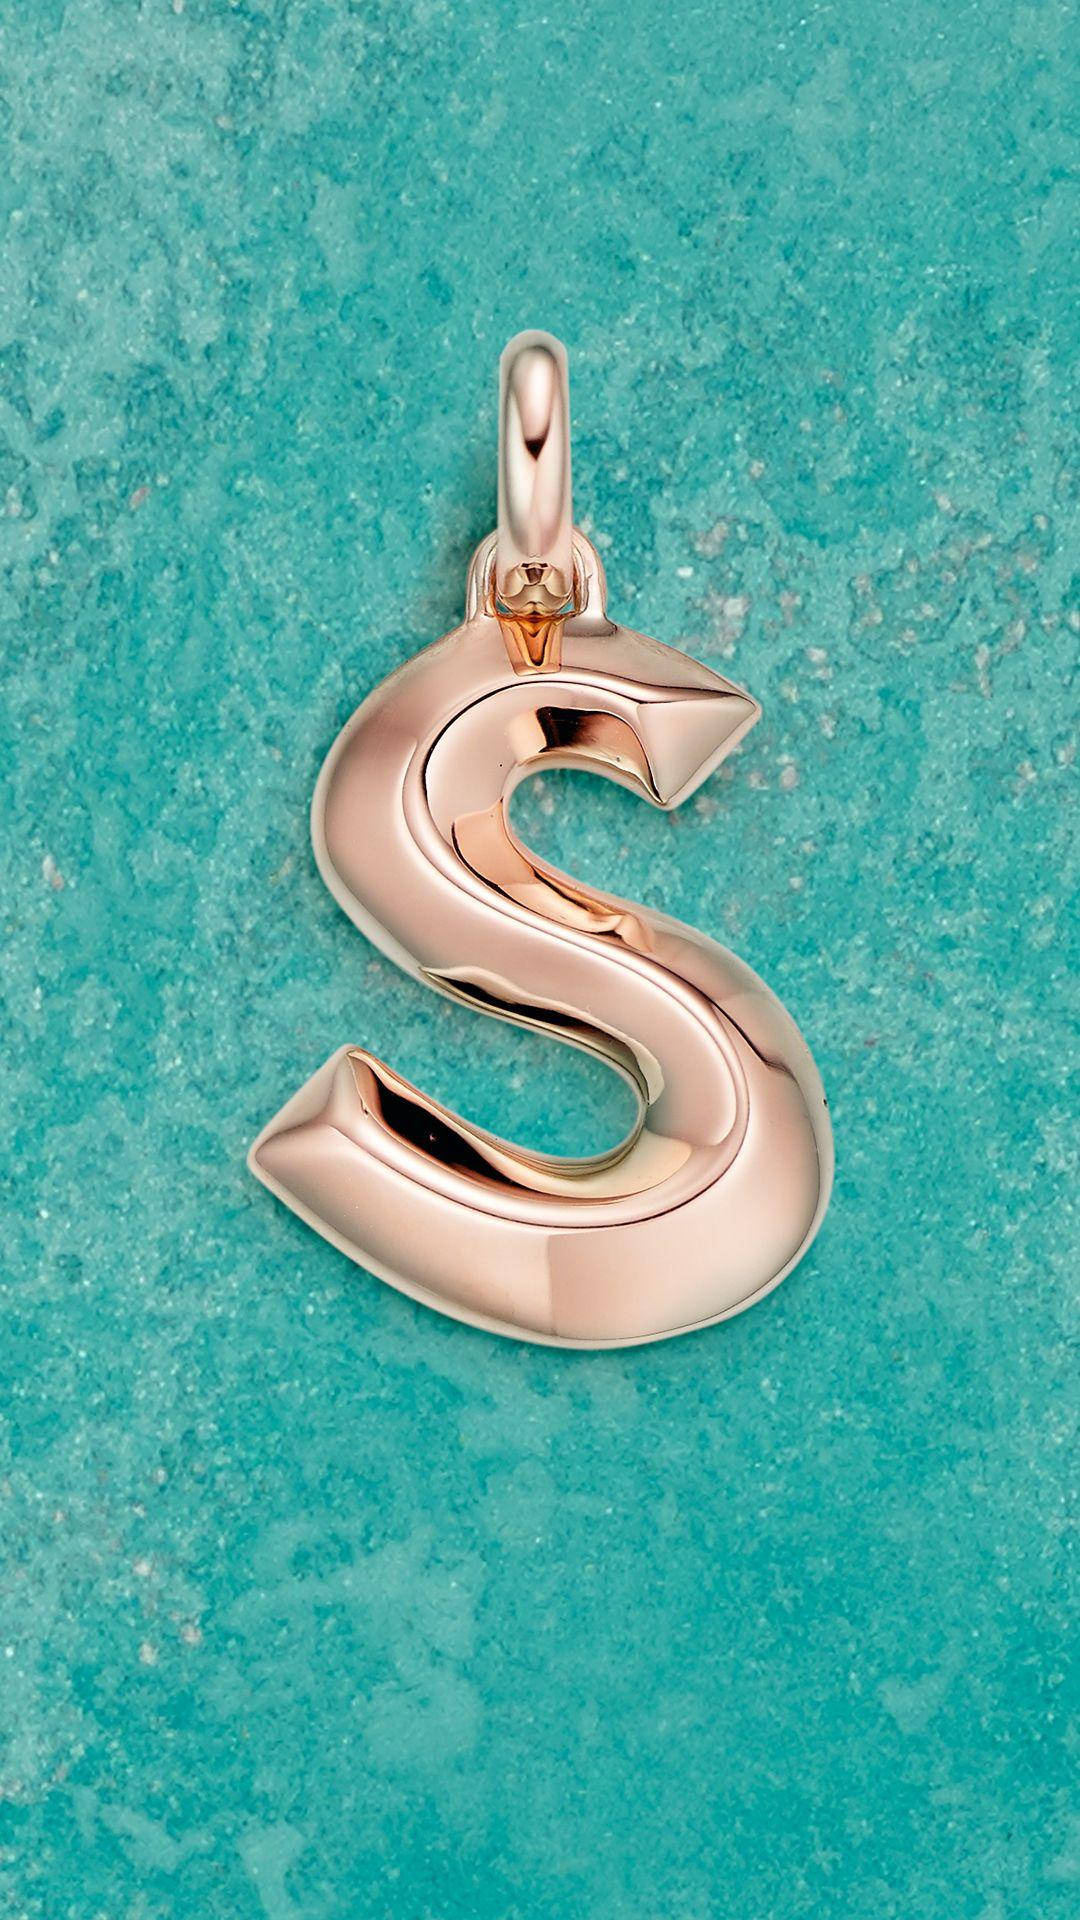 Letter S pendant, Unique design, HD wallpapers, Free download, 1080x1920 Full HD Handy